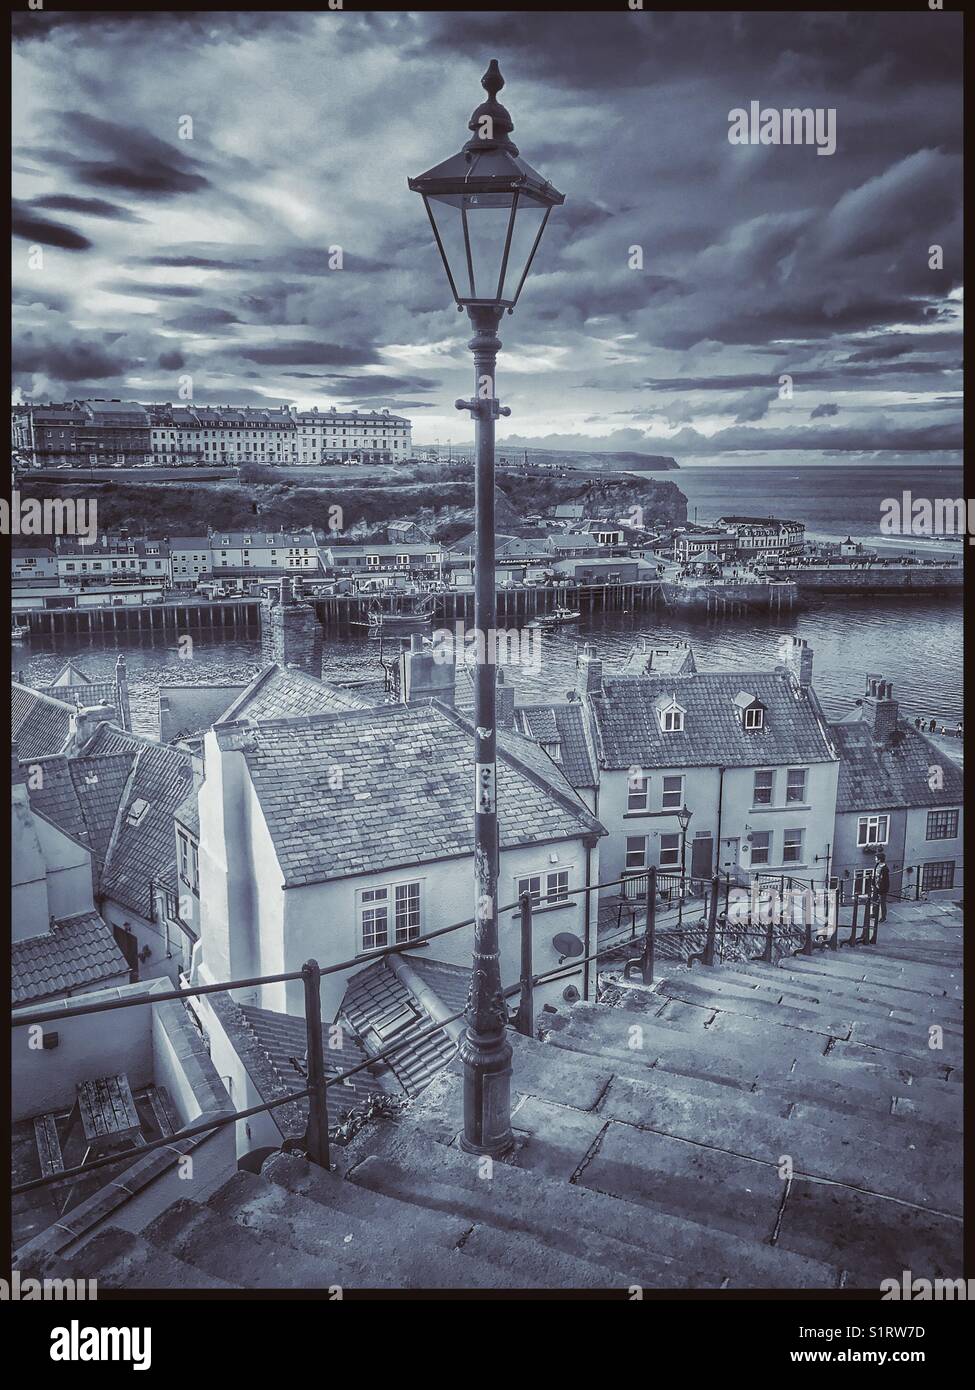 A view over Whitby, Yorkshire, England - from the famous 199 steps that connect The Old Town with St. Mary's Church. This area inspired parts of Bram Stoker's novel - 'Dracula' Photo © COLIN HOSKINS. Stock Photo